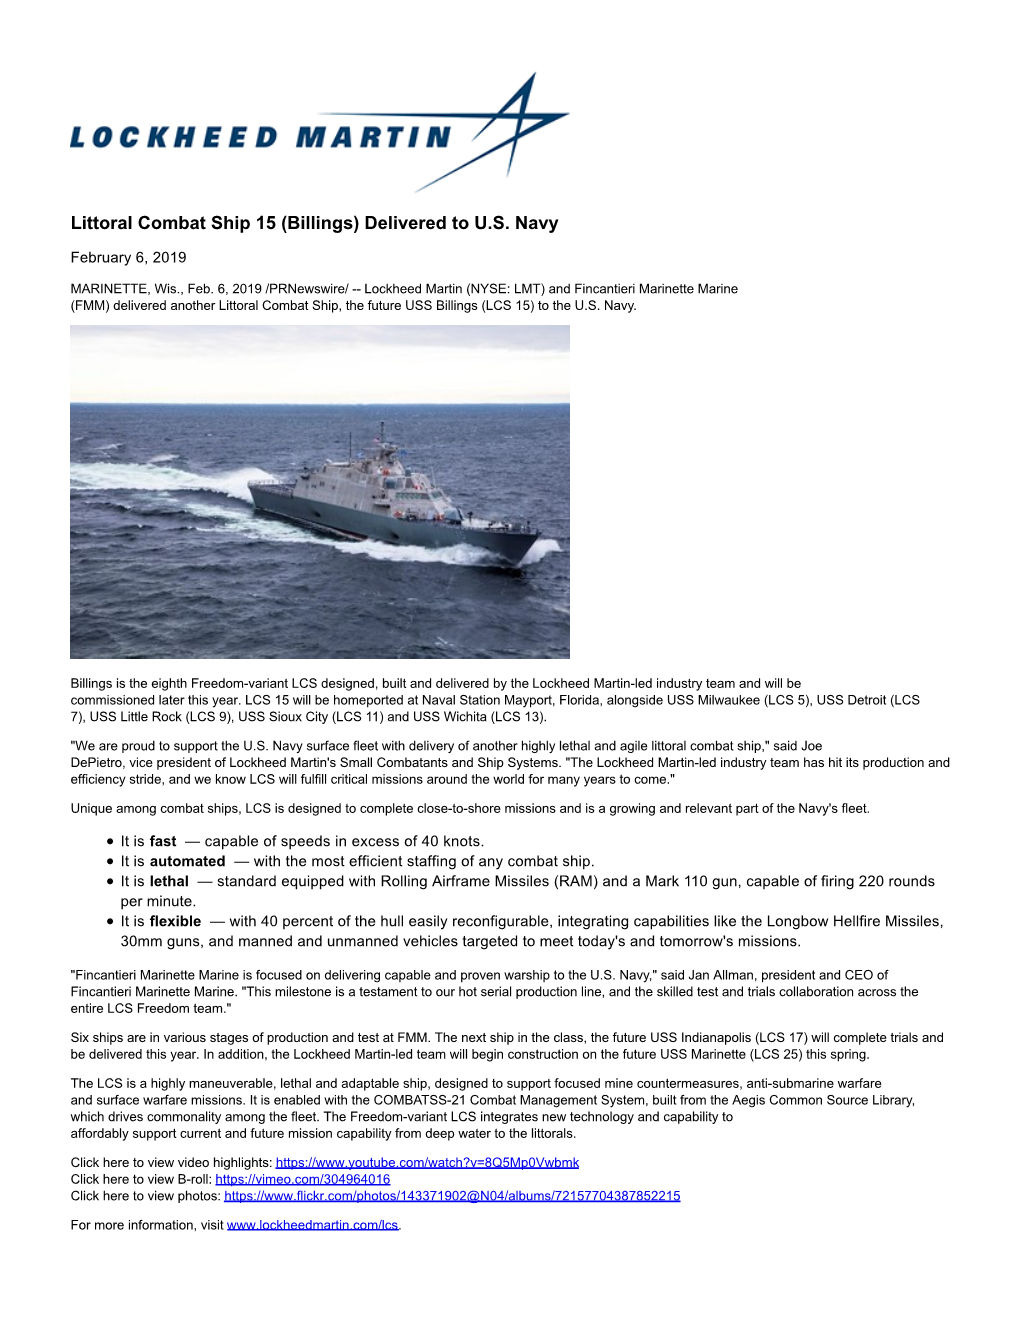 Littoral Combat Ship 15 (Billings) Delivered to US Navy